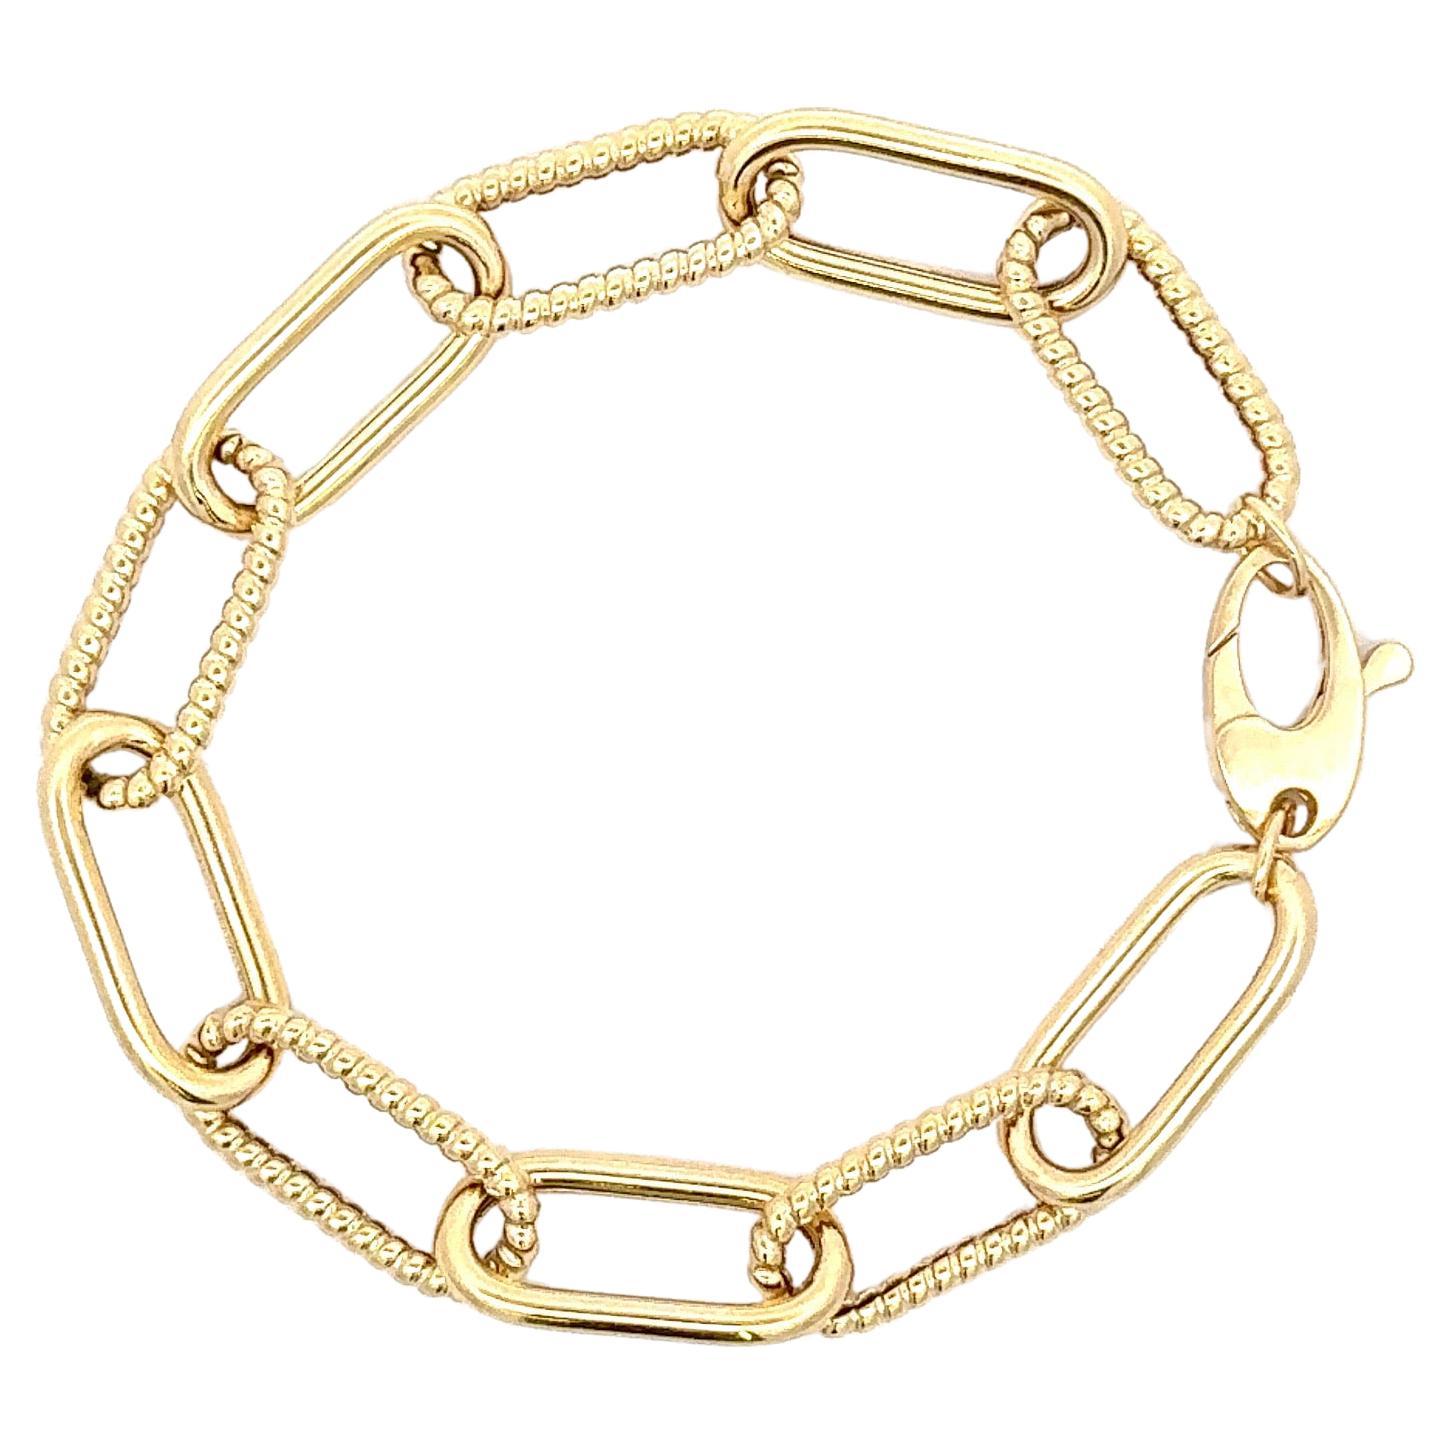 Paper clip bracelet with a twist & high polish alternating motif links weighing 6.6 grams, in 14 karat yellow gold.

Link Measurements: 
19.6 MM x 9 MM